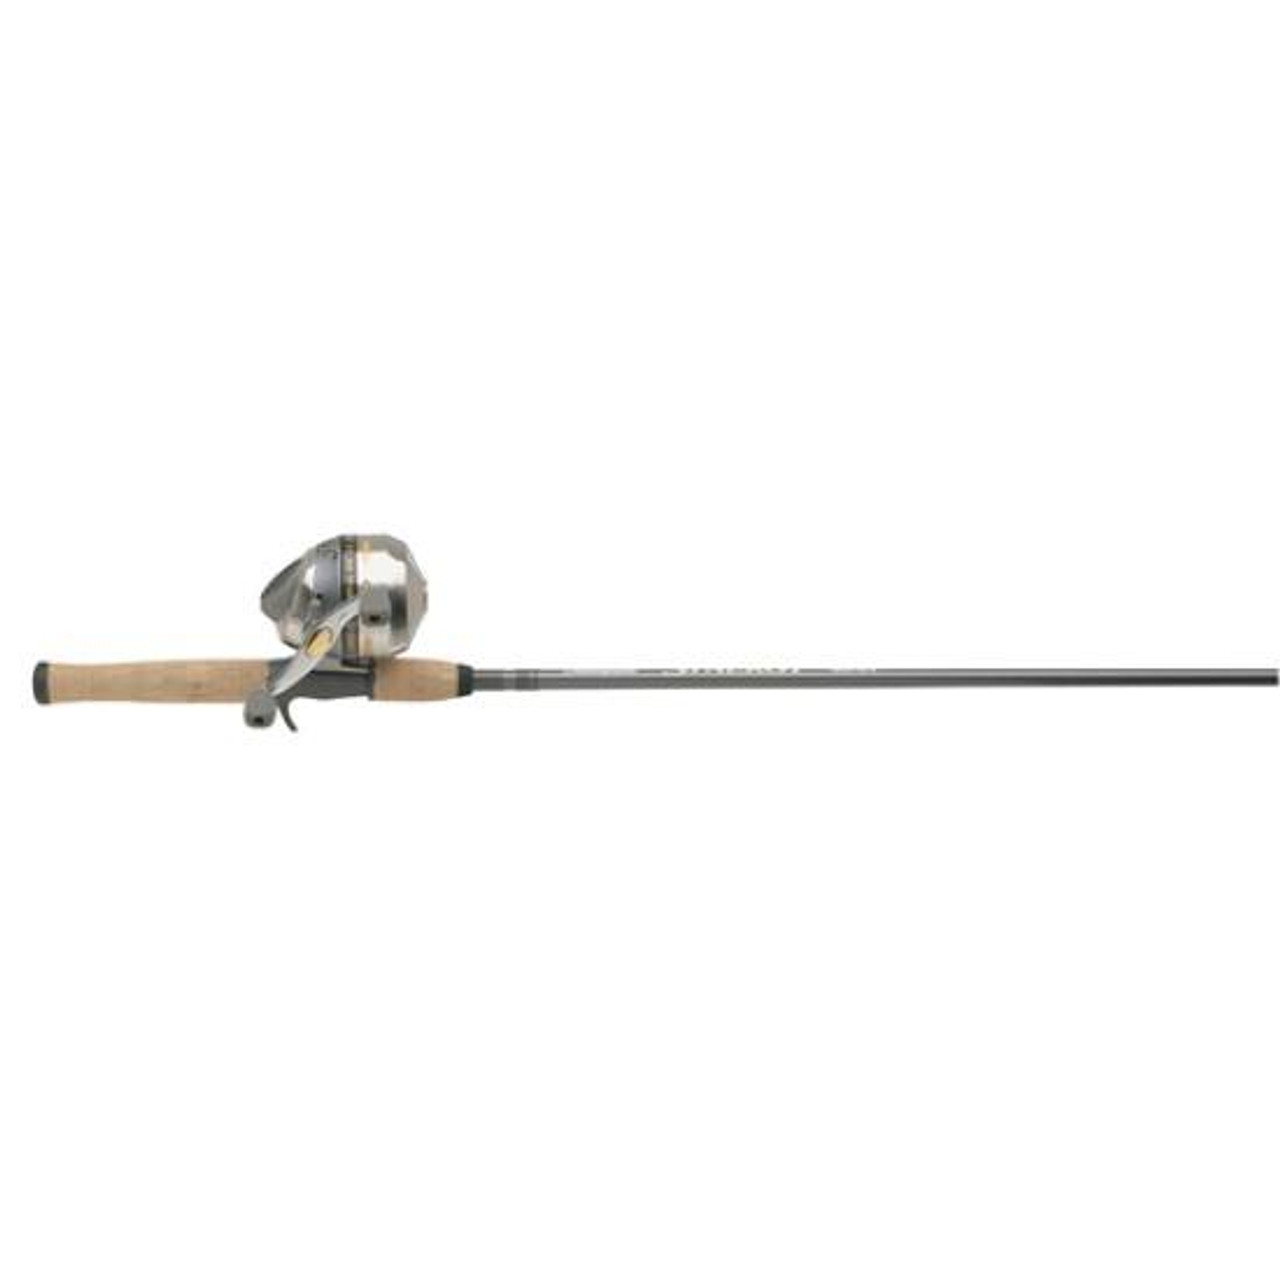 Shakespeare Synergy TI Spincast Reel and Rod Combo Graphite 6 Feet 6 Inches  Black 1147126 [FC-043388270238] - Cheaper Than Dirt